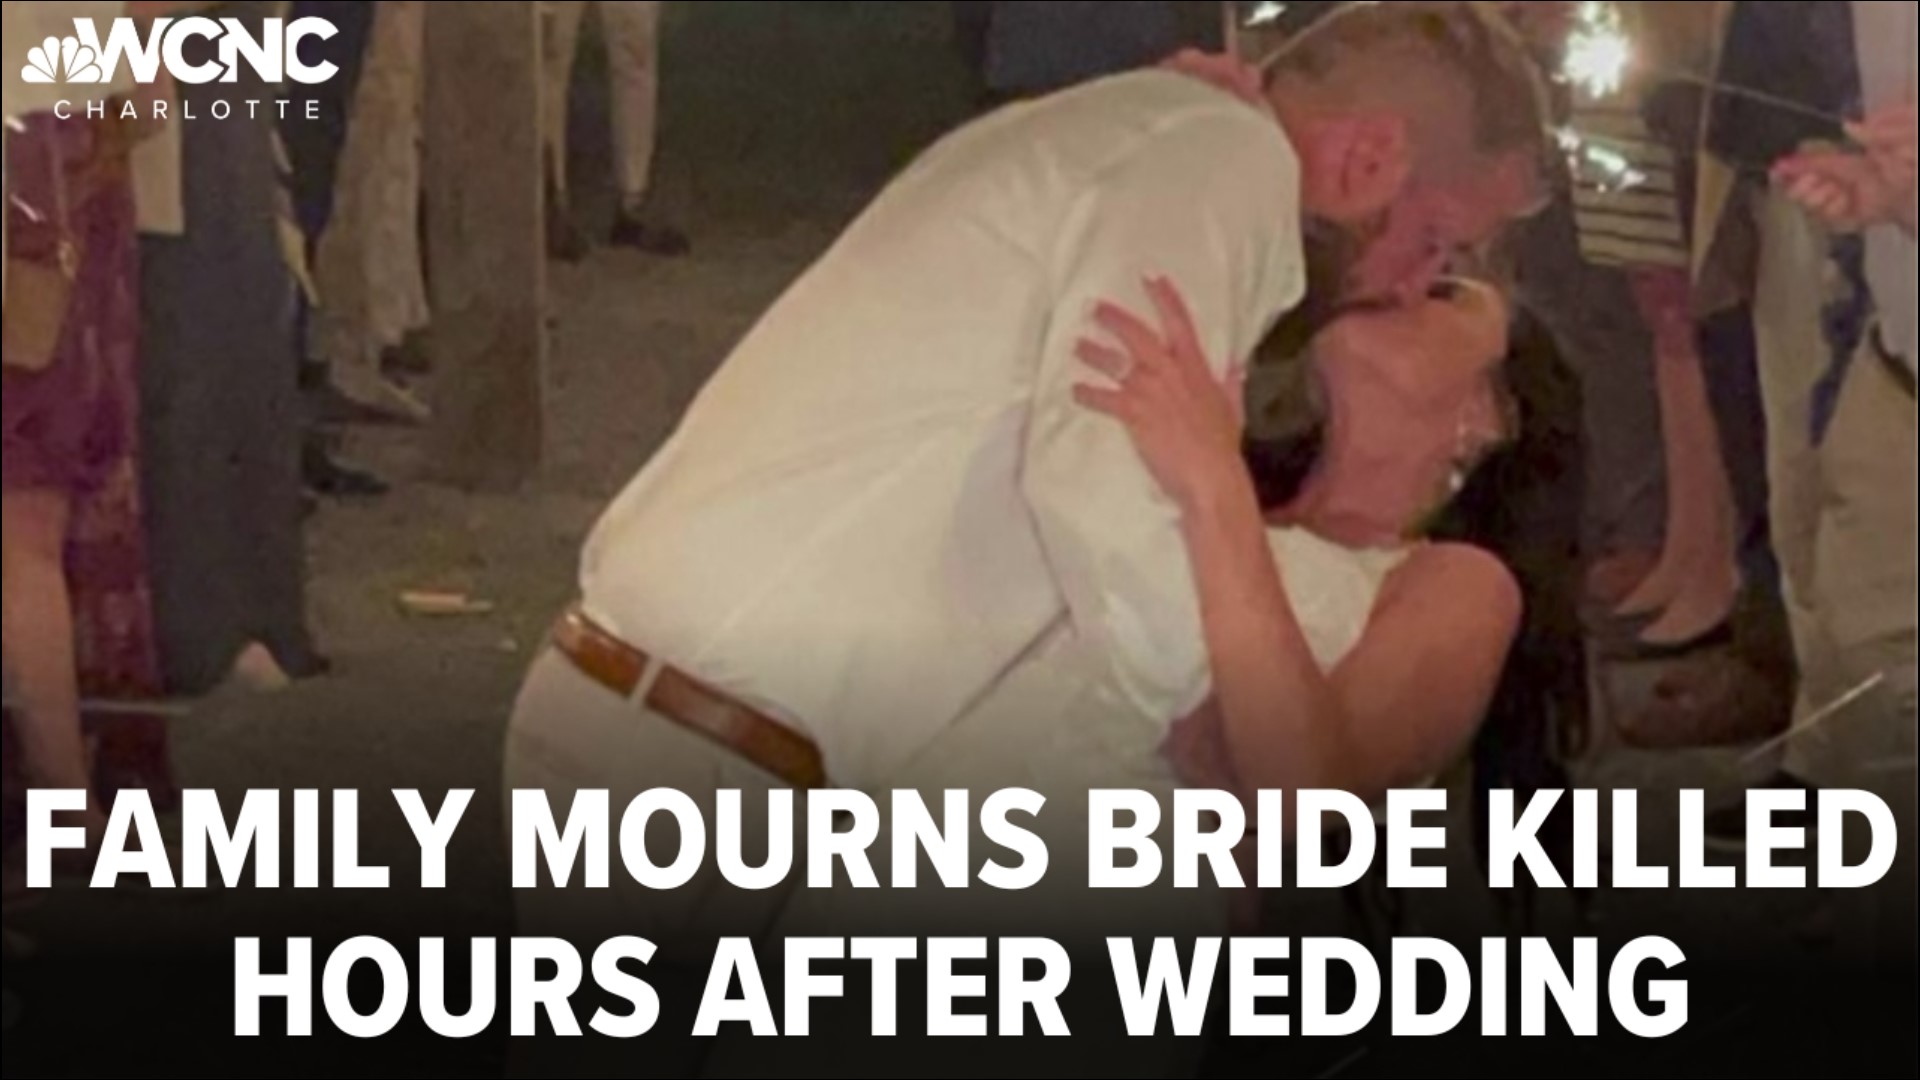 Samantha Hutchinson died and her new husband, Aric, was seriously hurt when a woman crashed into their golf cart in Folly Beach on their wedding night.